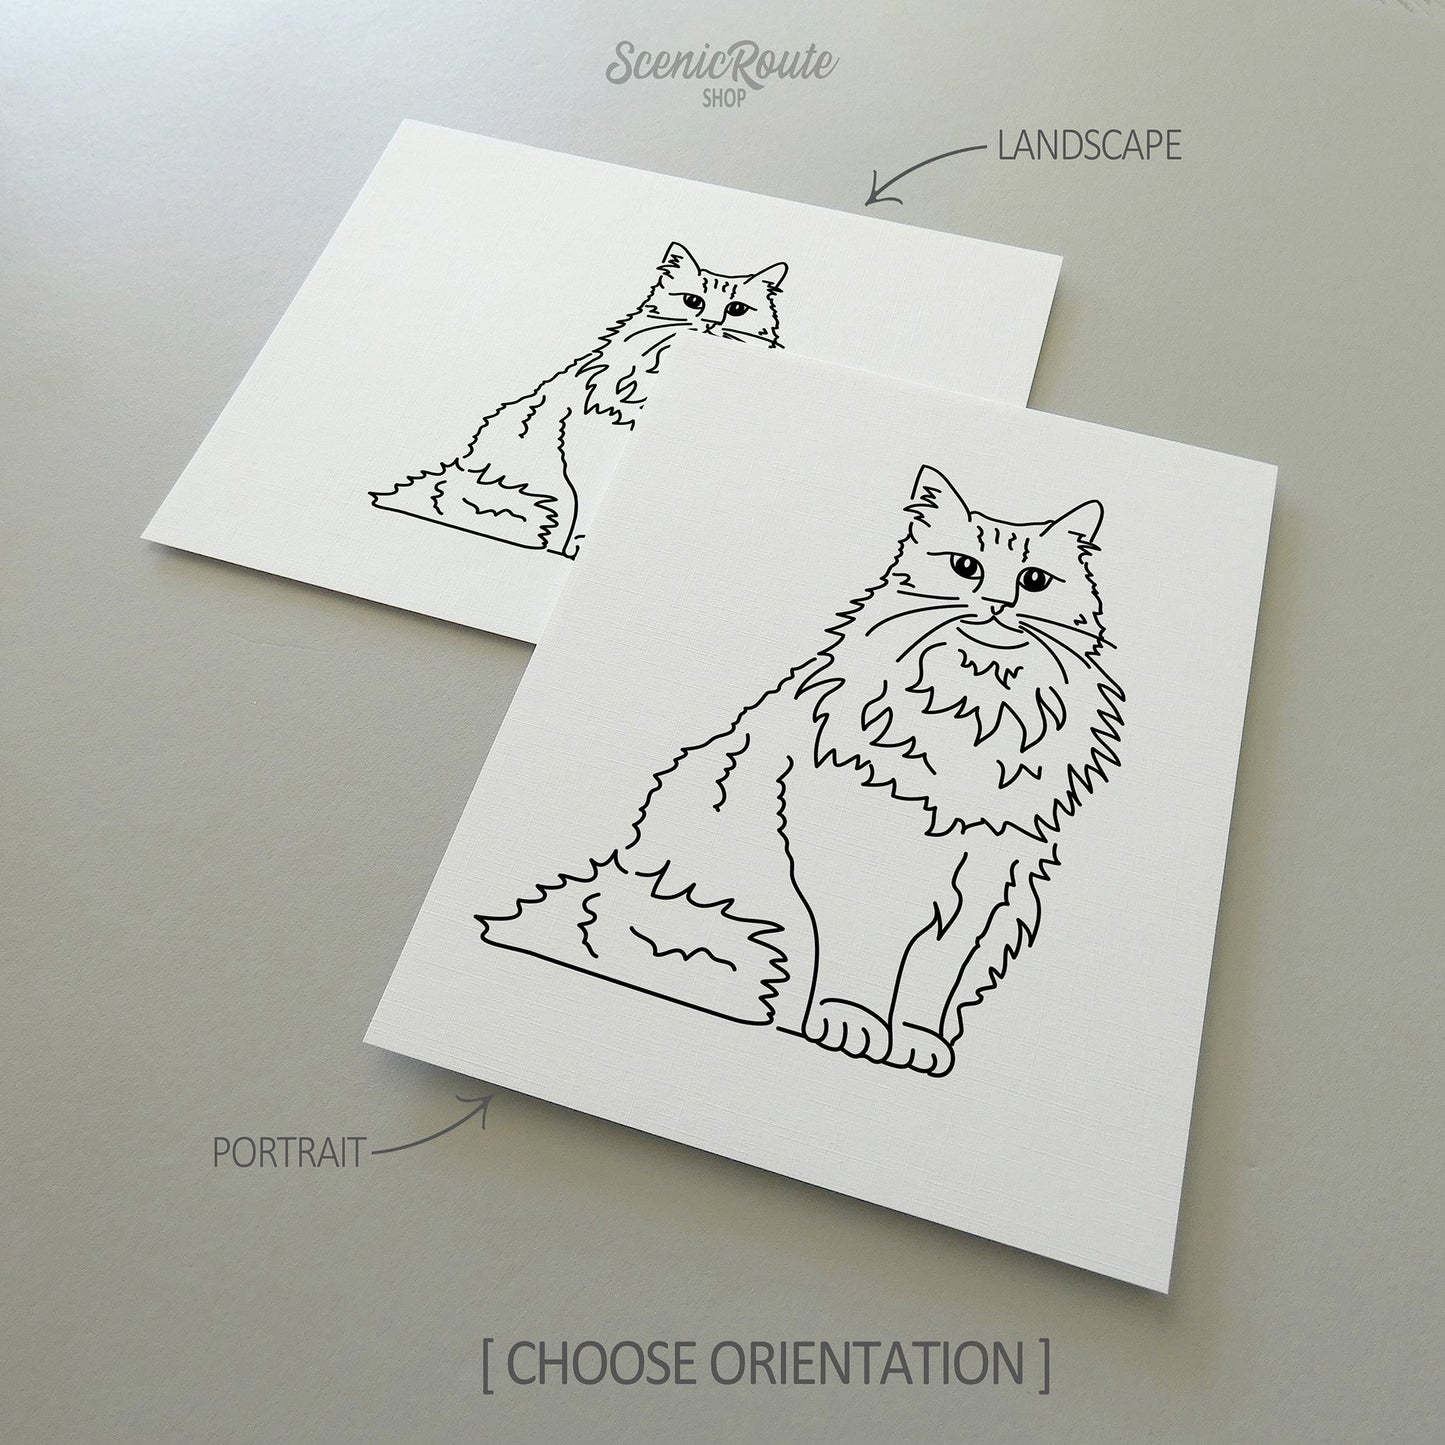 Two line art drawings of a Norwegian Forest cat on white linen paper with a gray background.  The pieces are shown in portrait and landscape orientation for the available art print options.